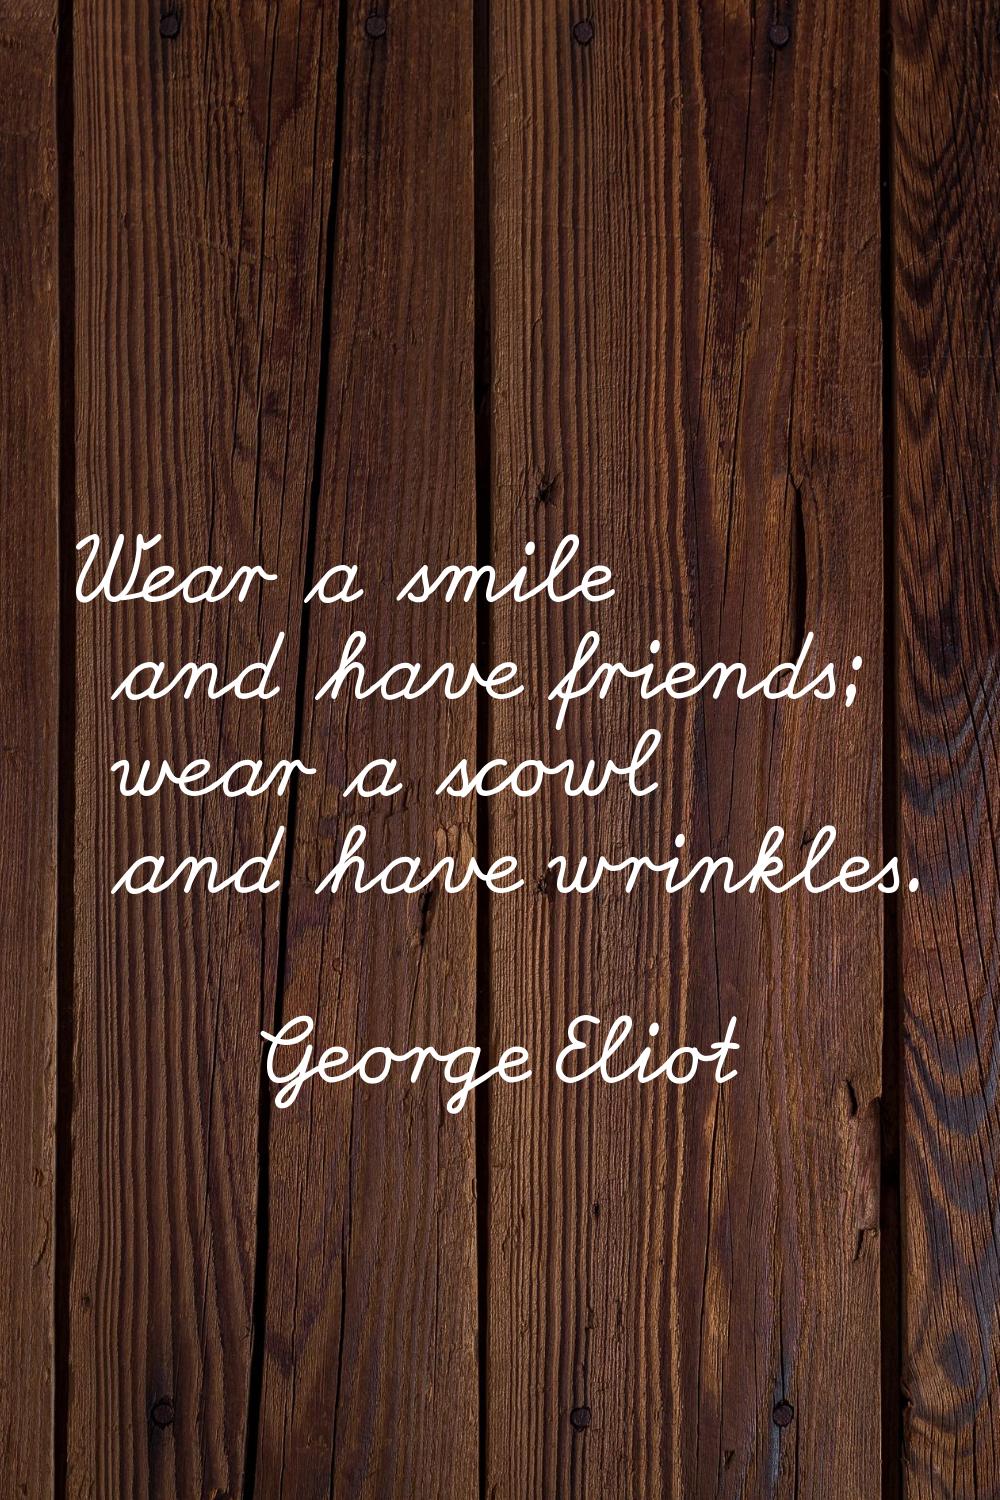 Wear a smile and have friends; wear a scowl and have wrinkles.